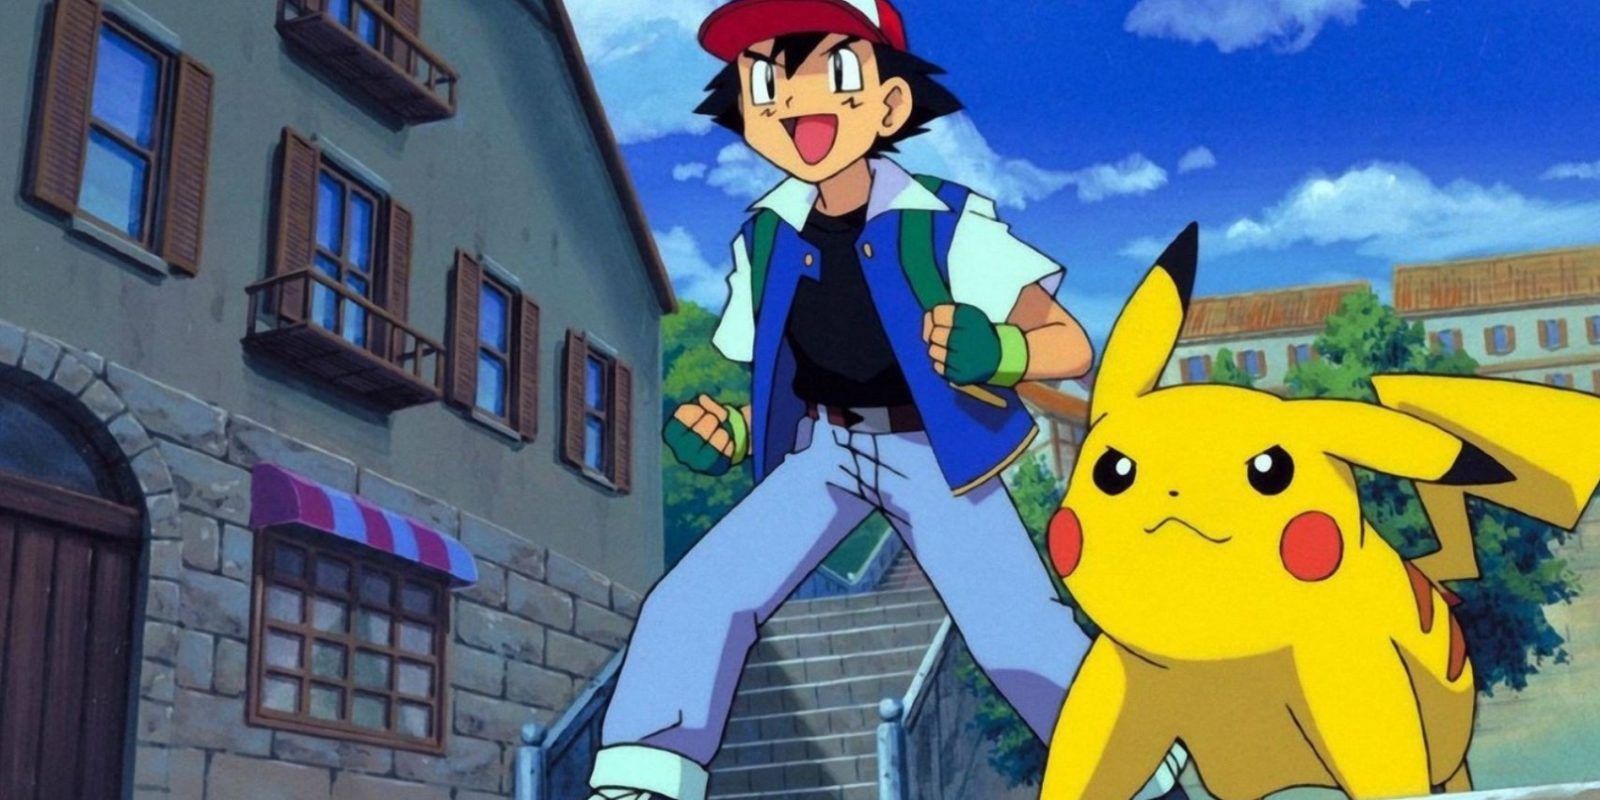 Ash Ketchum and Pikachu looking determined in Pokemon.